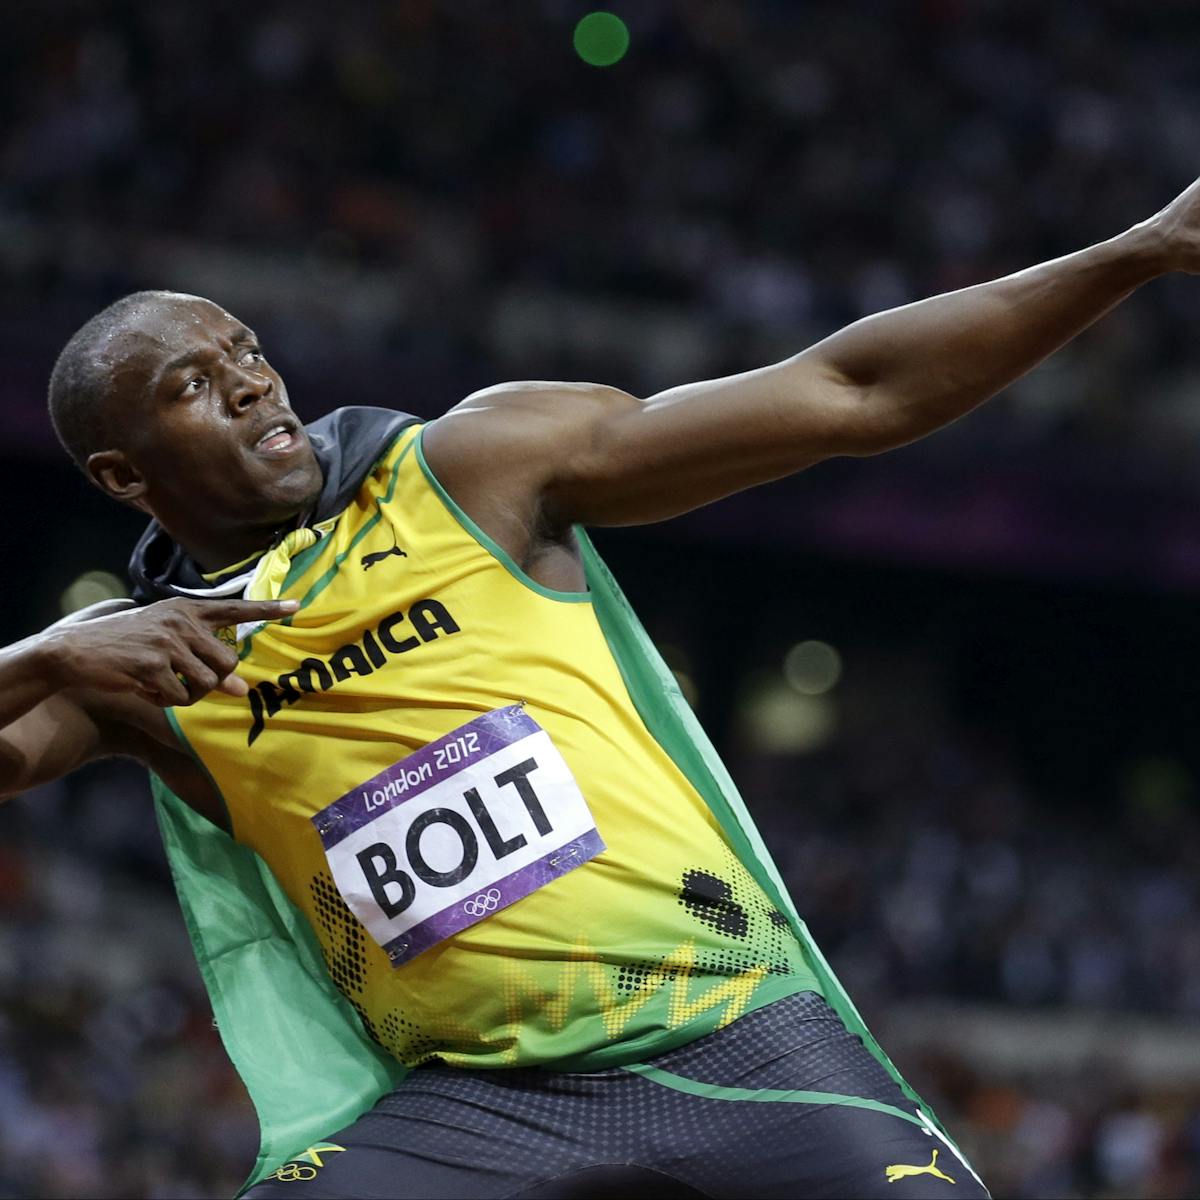 Usain st leo bolt, oj, cd is a jamaican retired sprinter, widely considered...